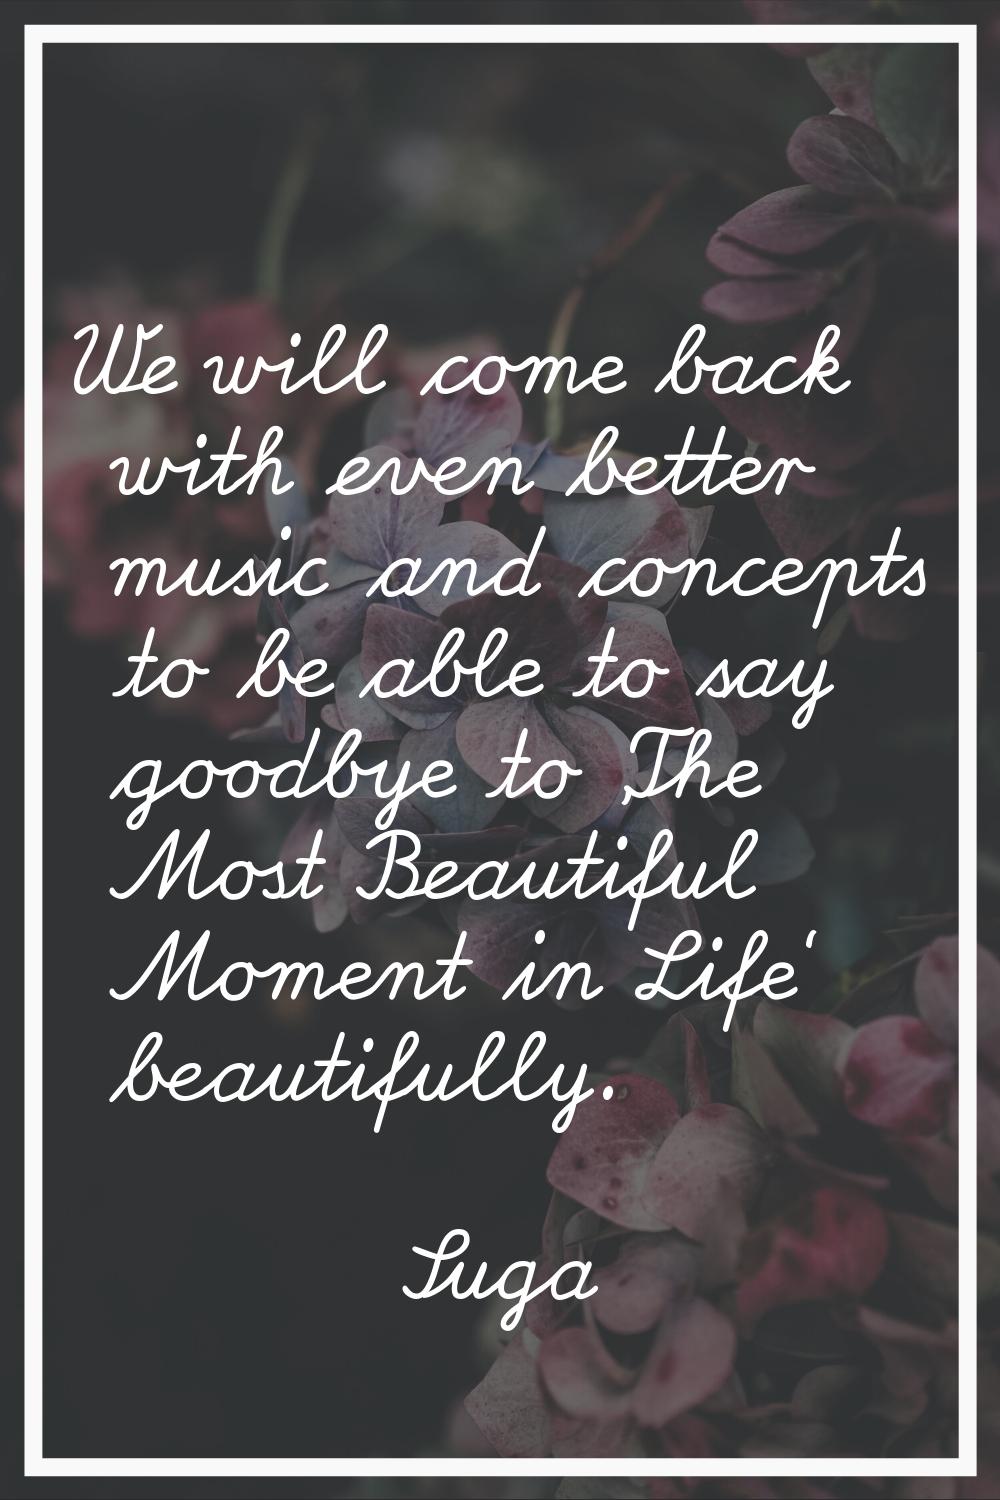 We will come back with even better music and concepts to be able to say goodbye to 'The Most Beauti